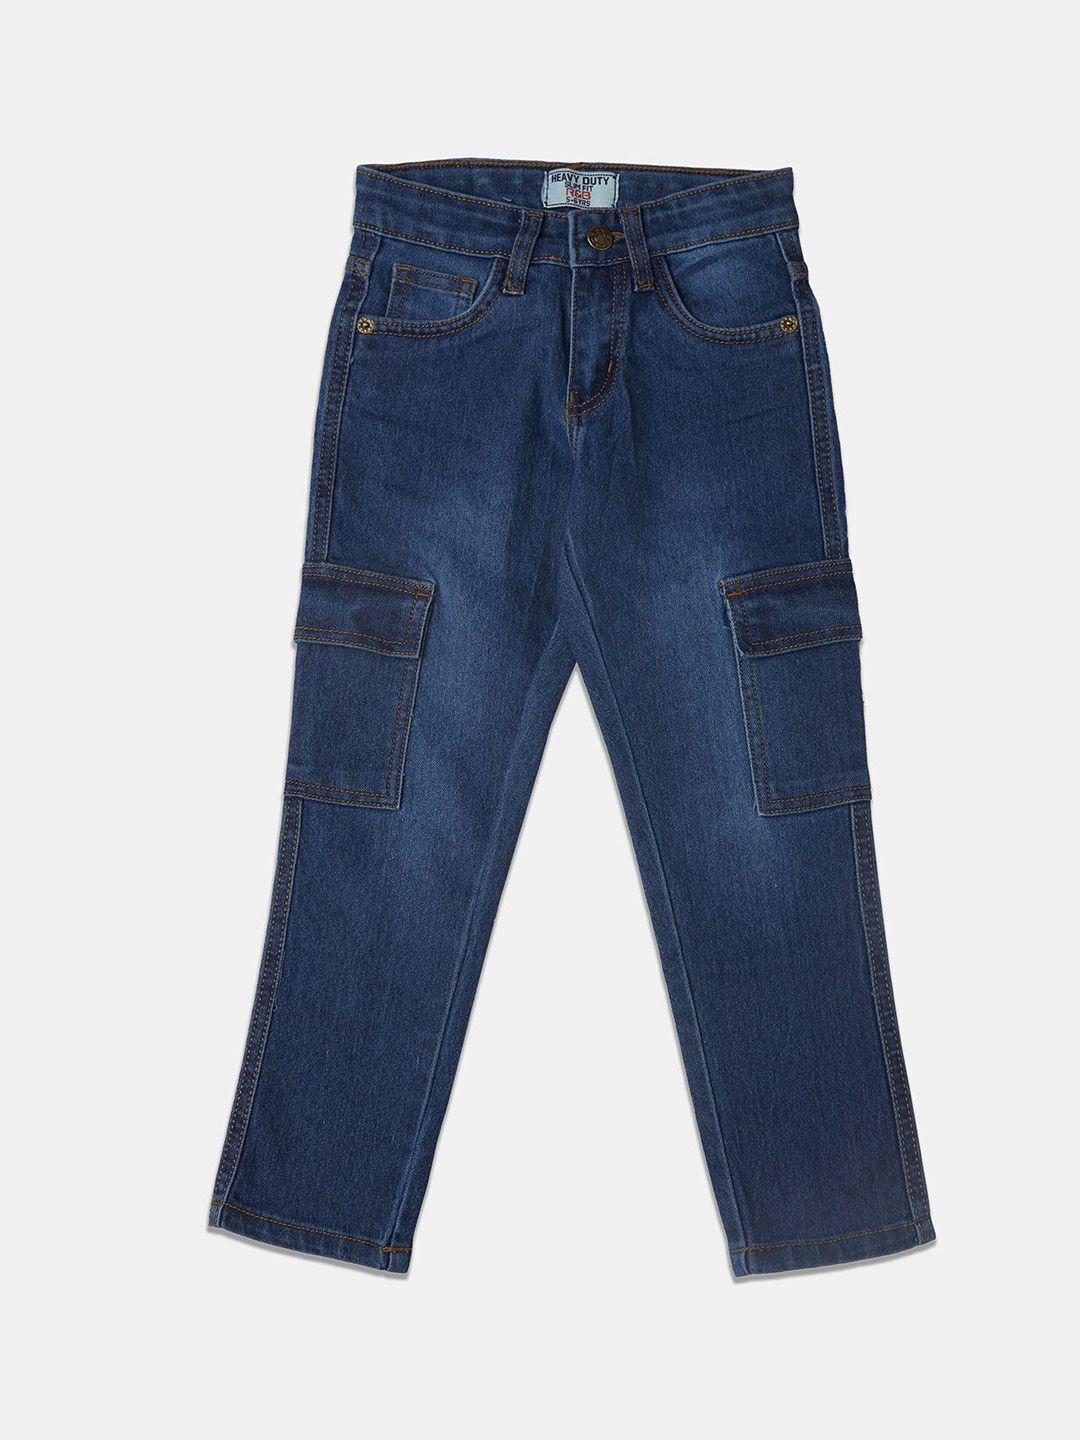 r&b boys relaxed fit clean look cotton jeans